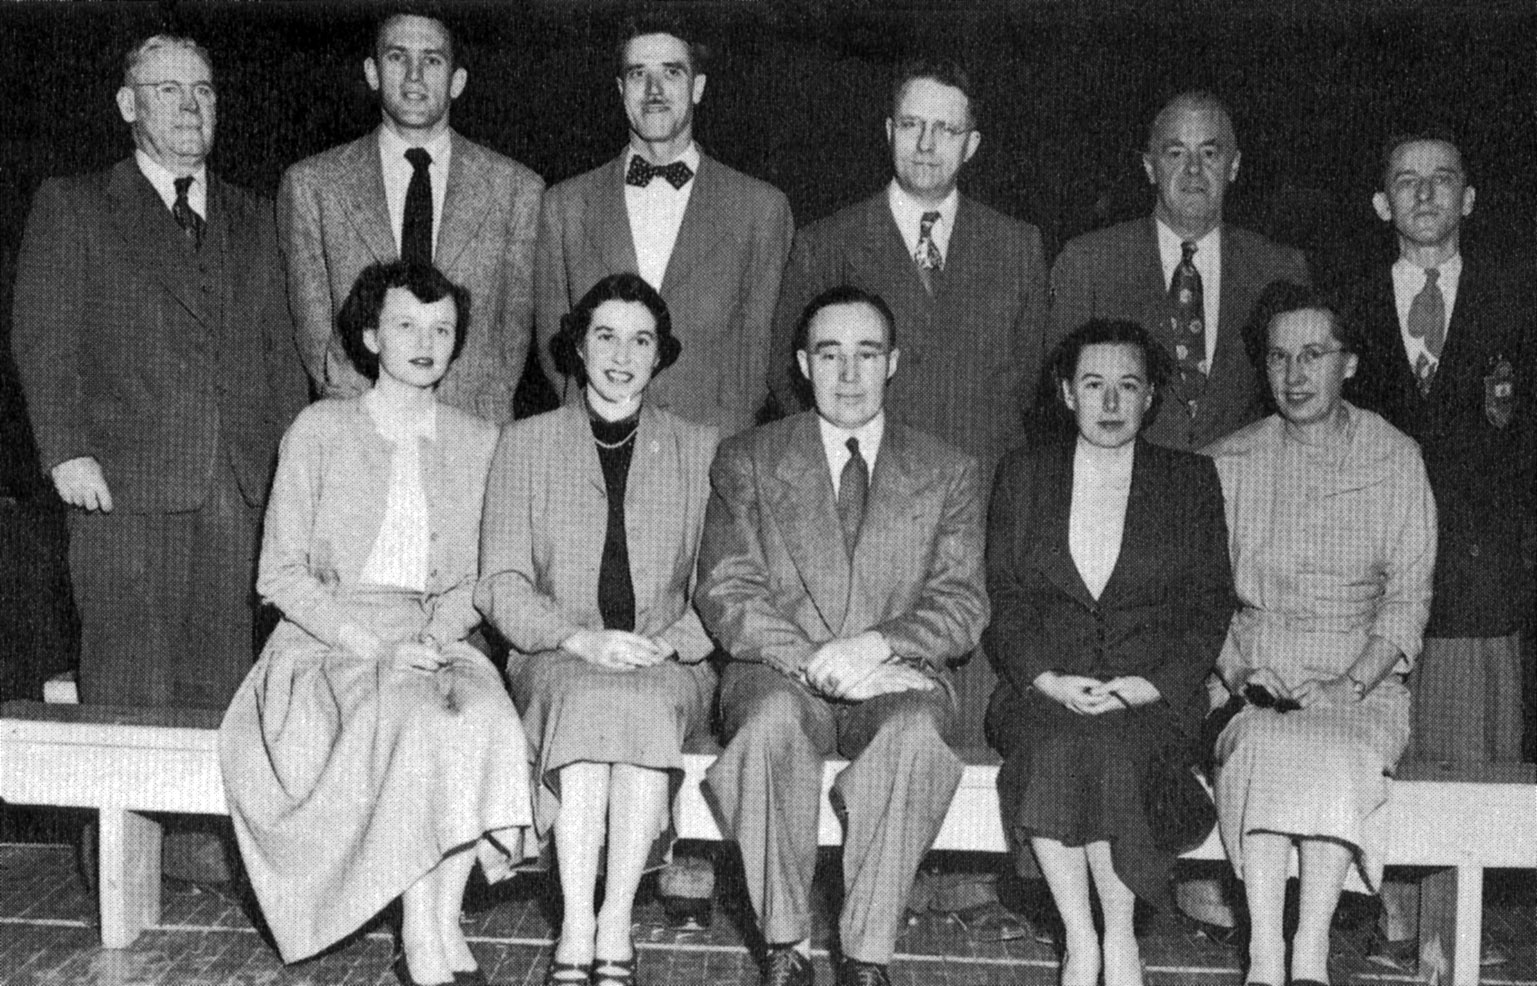 (Click to magnify - multiple levels of magnification) FRONT ROW: Miss Pearson, Miss Carnwith, Mr. Peter Bernhardt, Miss Thompson, Miss McQuade; BACK ROW: Mr. Barnhardt, Mr. Bob Rattray, Mr. Bert Law, Mr. Robinson, Mr. Crawford, Mr. Brooks.